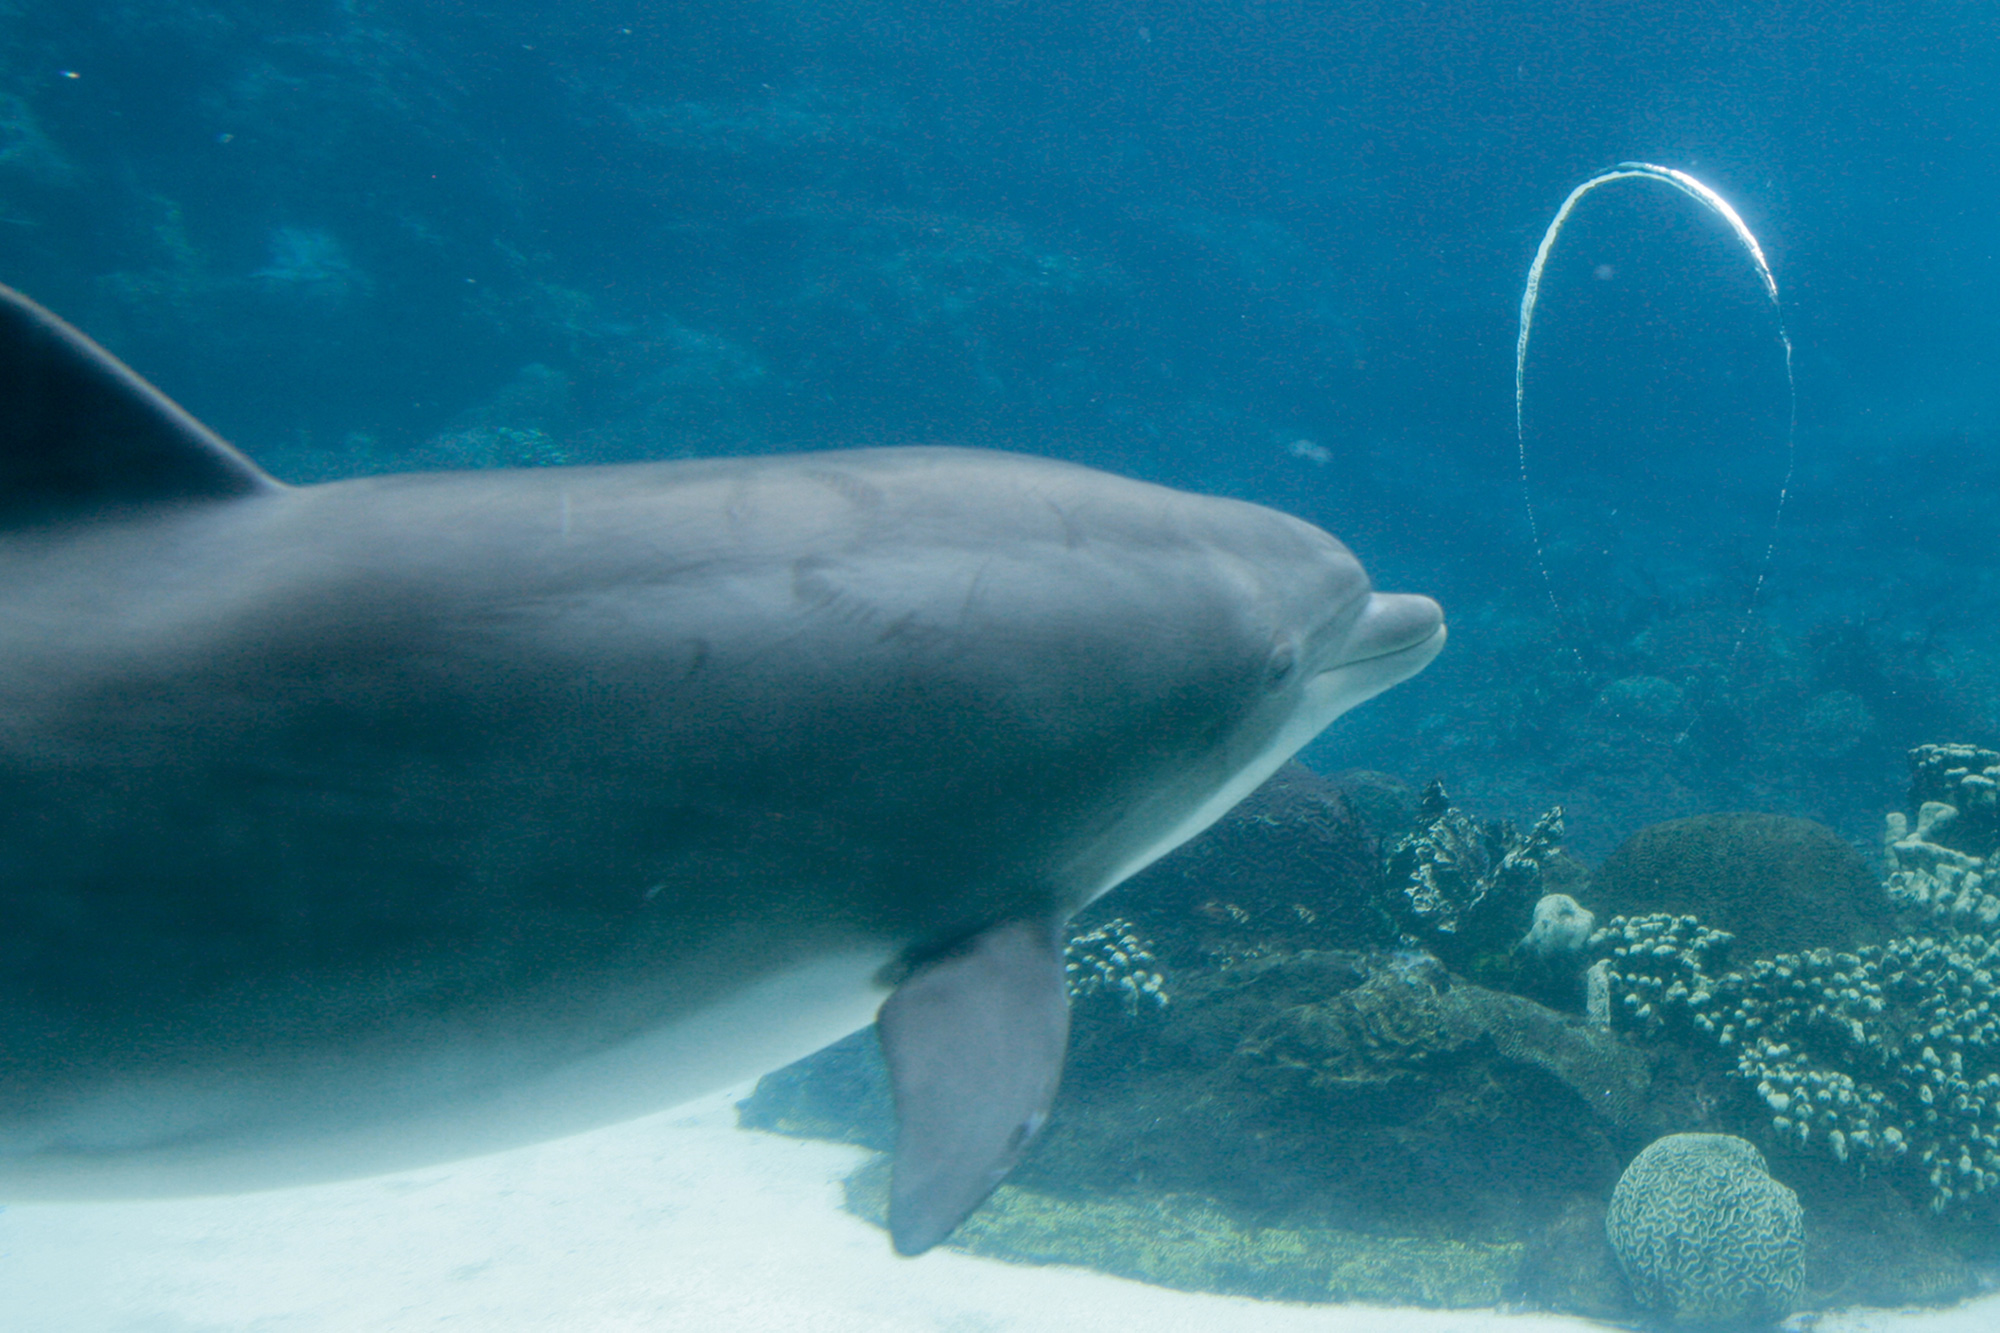 A photo of a bottlenose dolphin looking at a perfect bubble ring that it has produced through its blowhole.